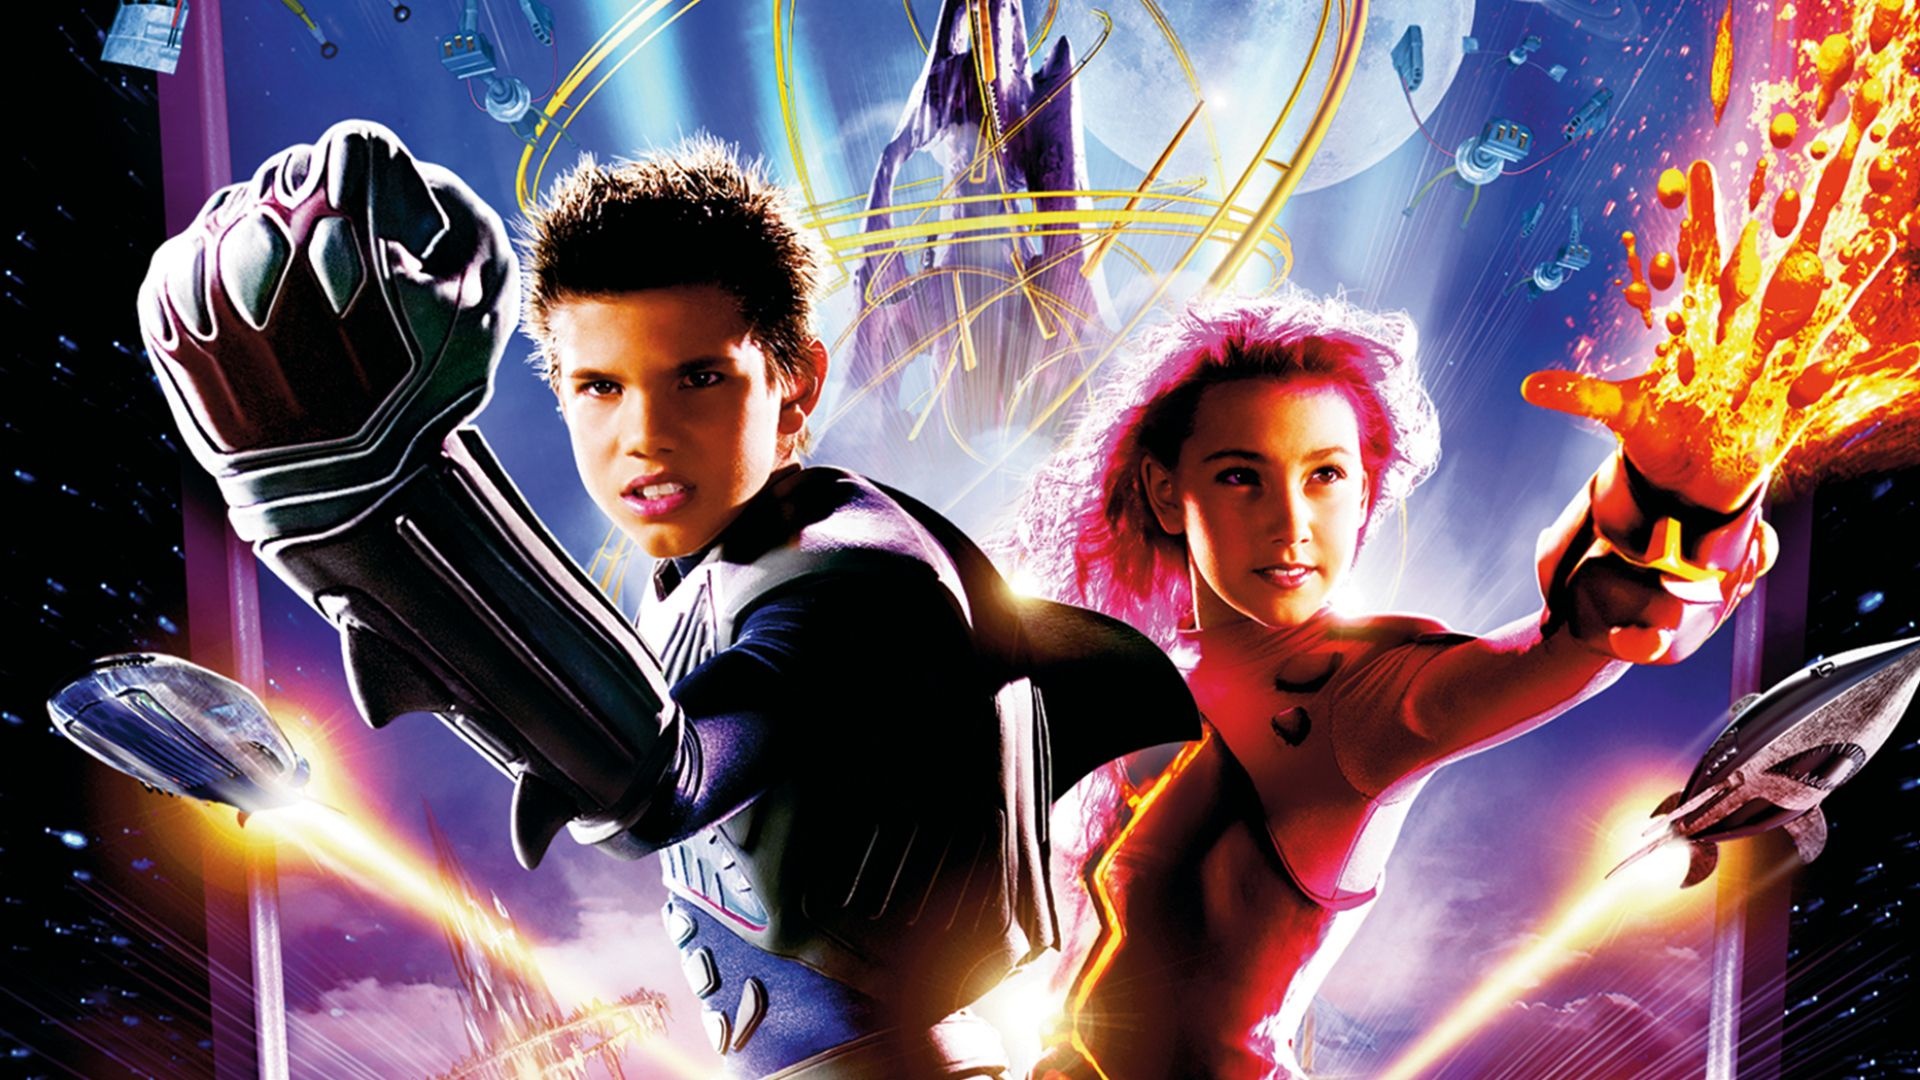 Miramax Films, Sharkboy and Lavagirl, Top free wallpapers, Backgrounds, 1920x1080 Full HD Desktop